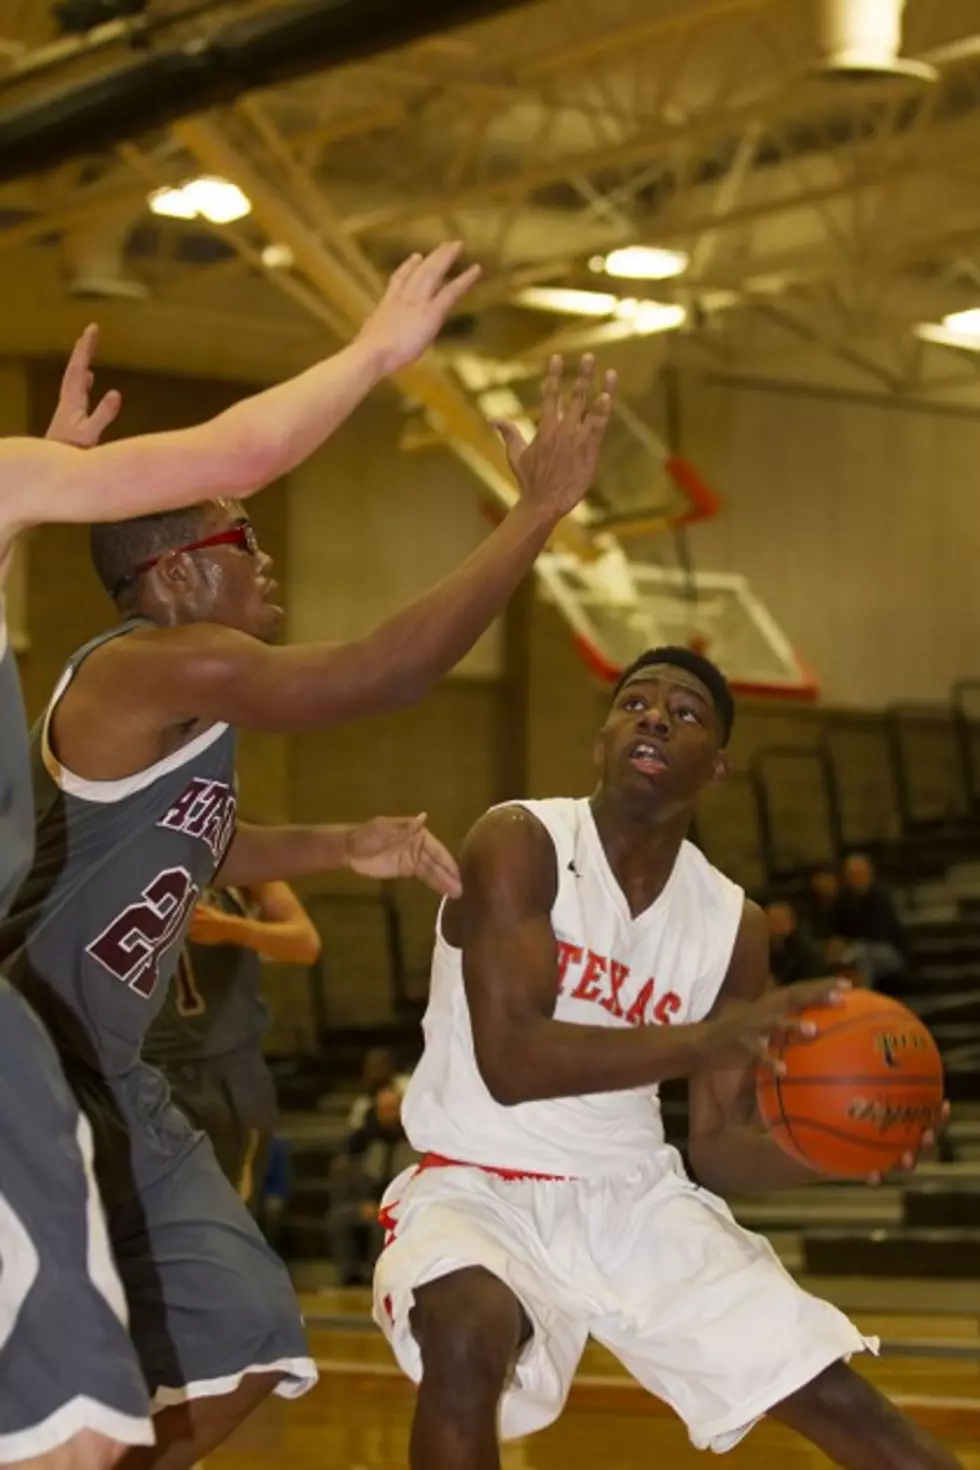 Texas High Holds Off Liberty-Eylau for 86-73 Win